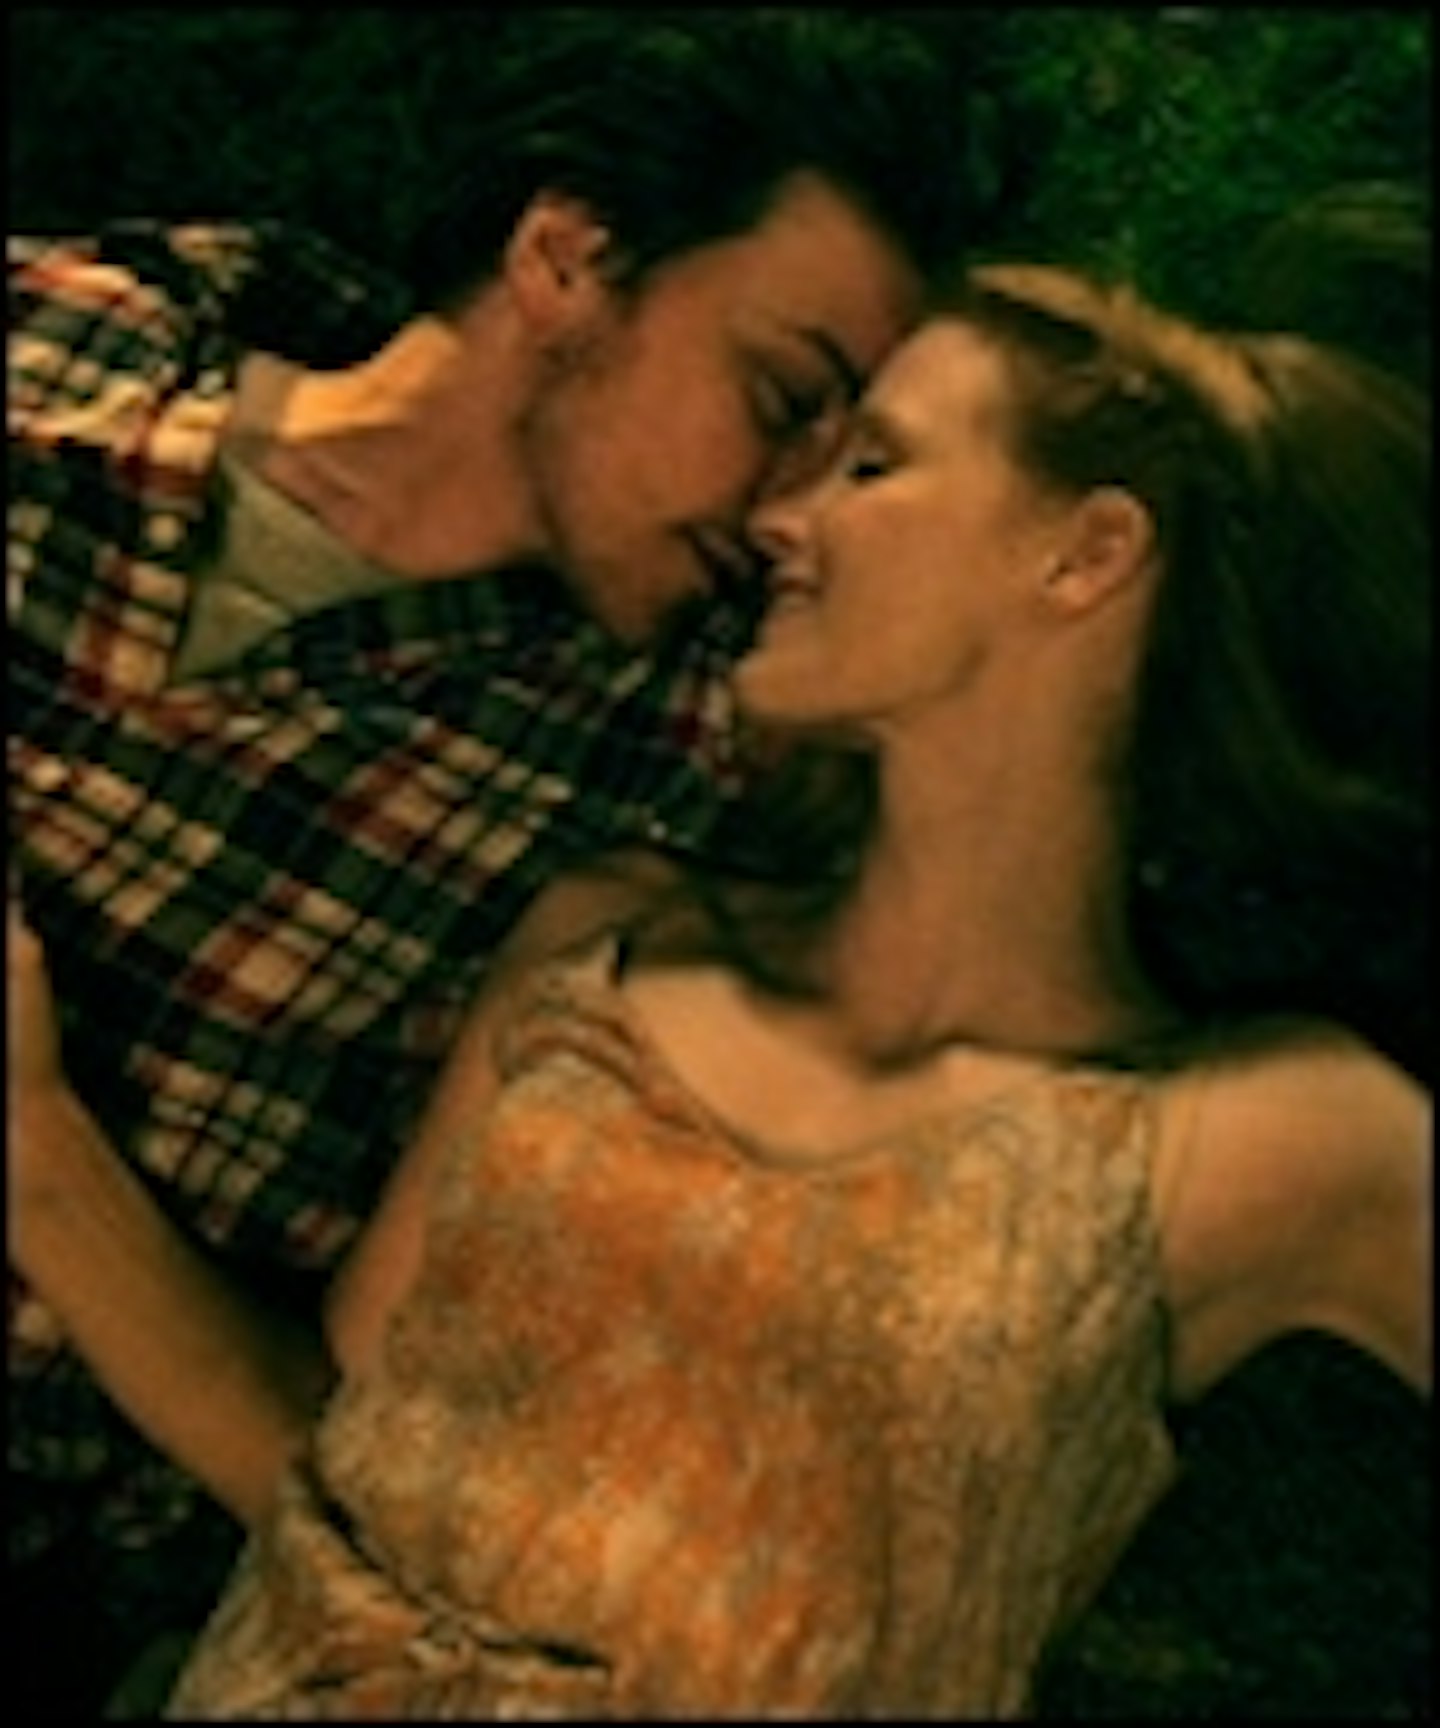 First Trailer For The Disappearance Of Eleanor Rigby